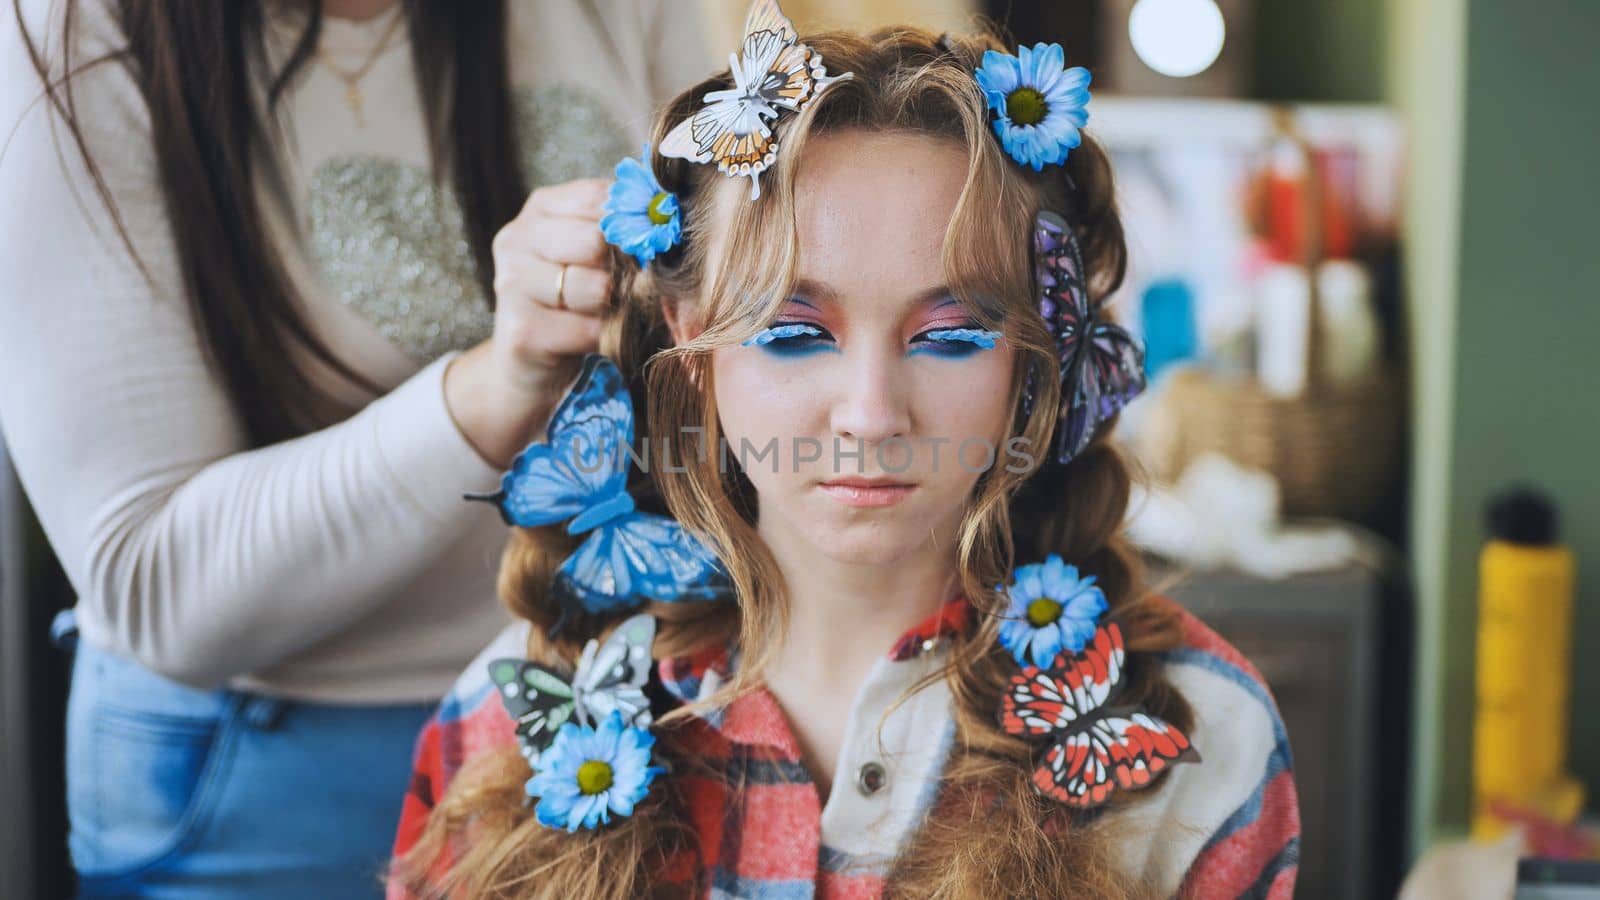 The hairdresser decorates the model's hair with blue flowers and butterflies. by DovidPro